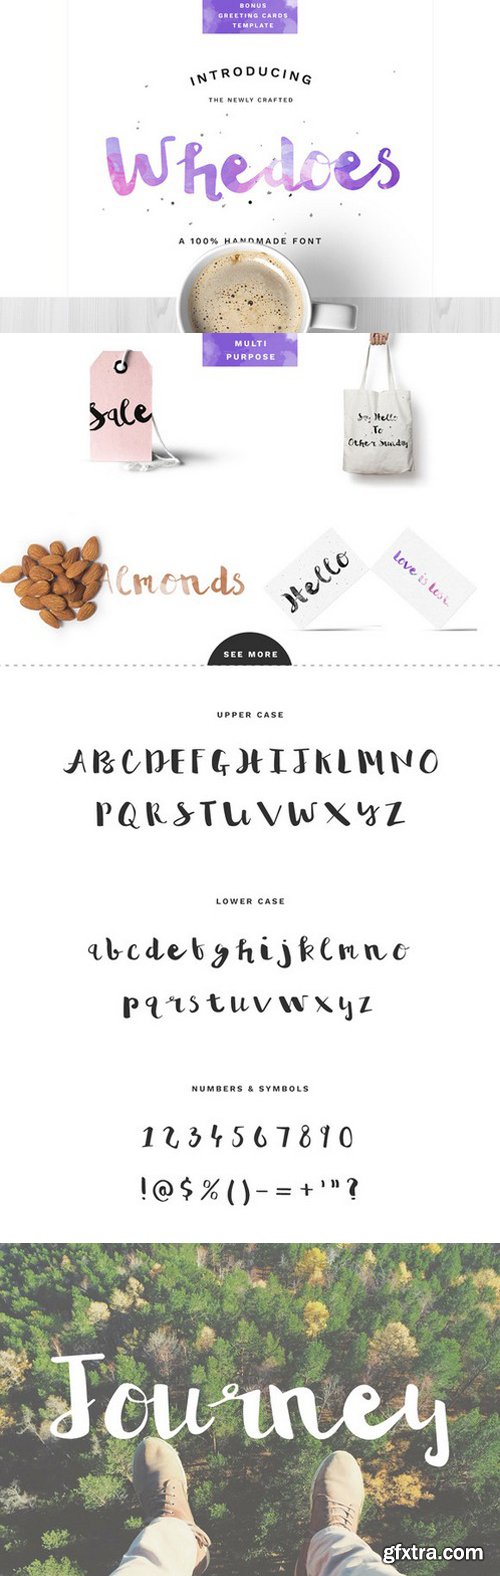 CM - Whedoes Handmade Font 528033